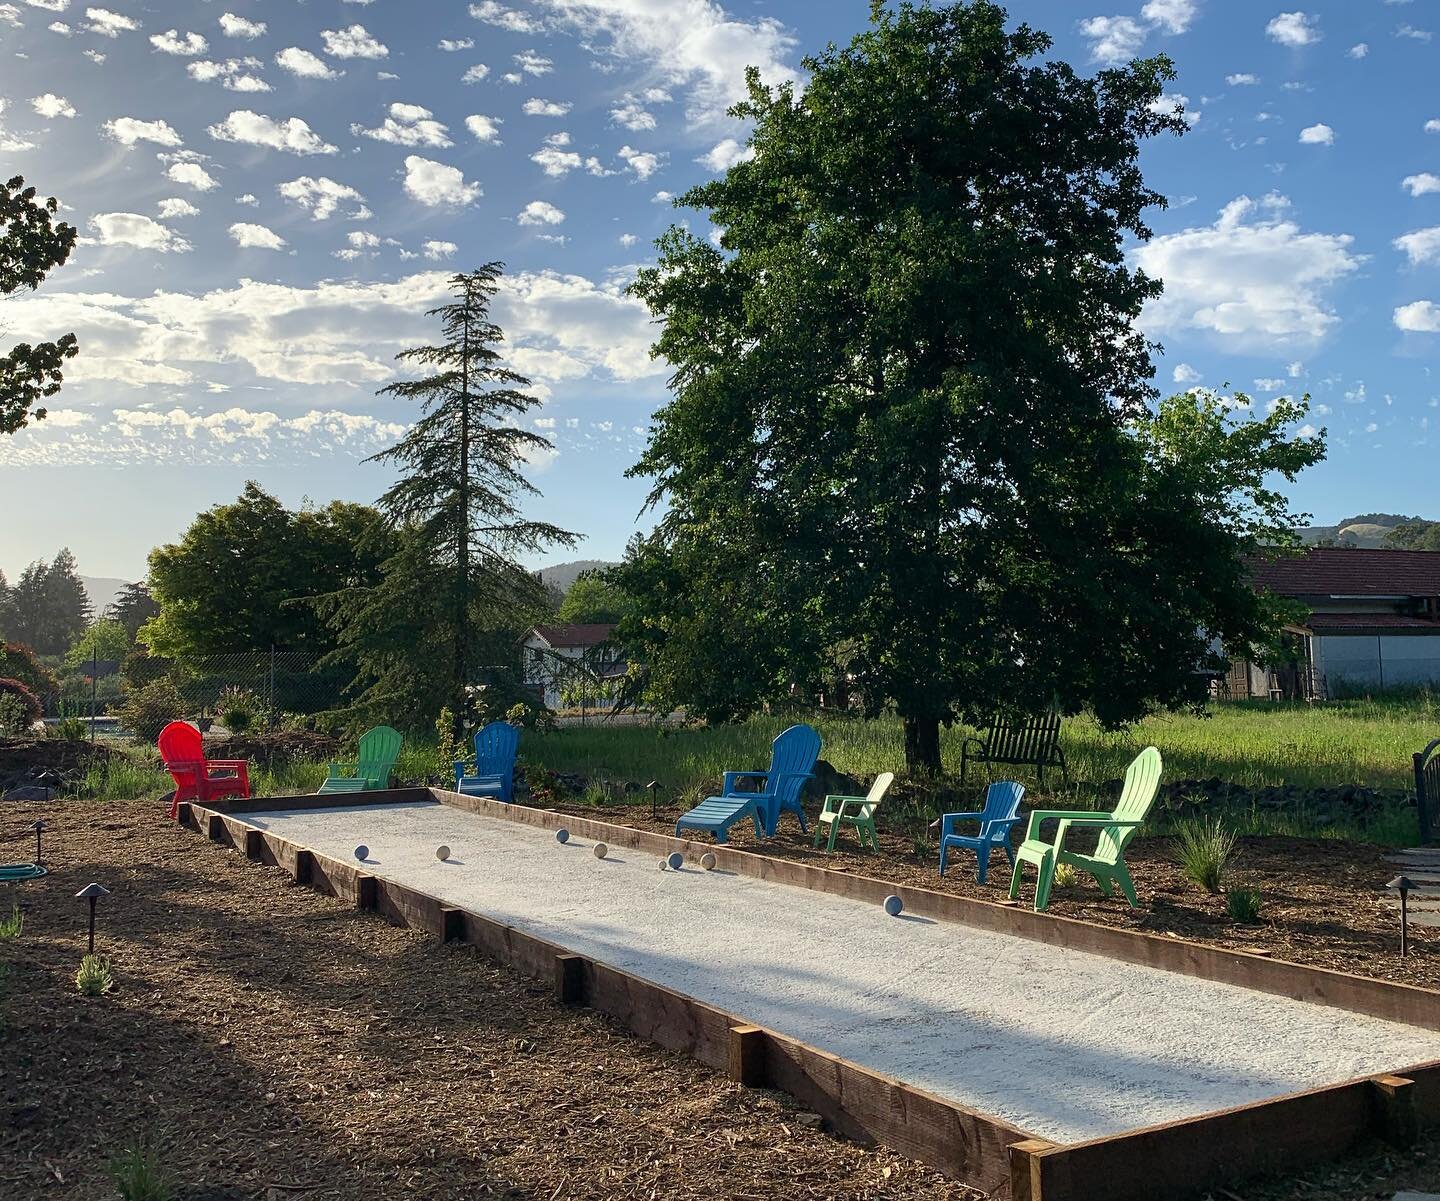 Just in time for summer vacay fun ✨

We regenerated an old landscape into a fresh, playful, pollinator full garden with lots of reuse materials 🦋

Revived bocce/game court, concrete re used as flagstone pathways, old wine barrels for sonoma flair, p